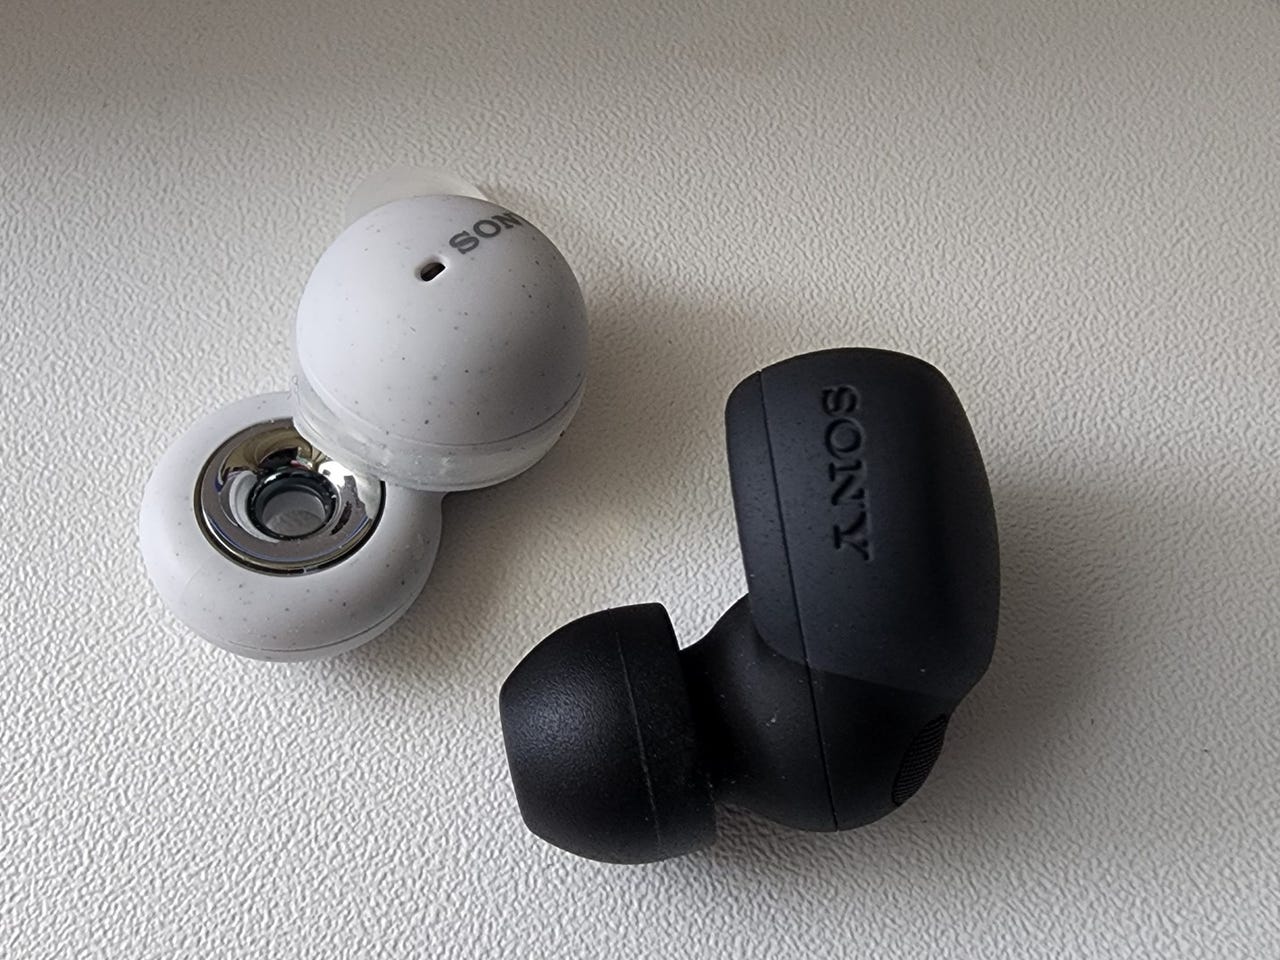 Sony LinkBuds review: The most exciting headphones today